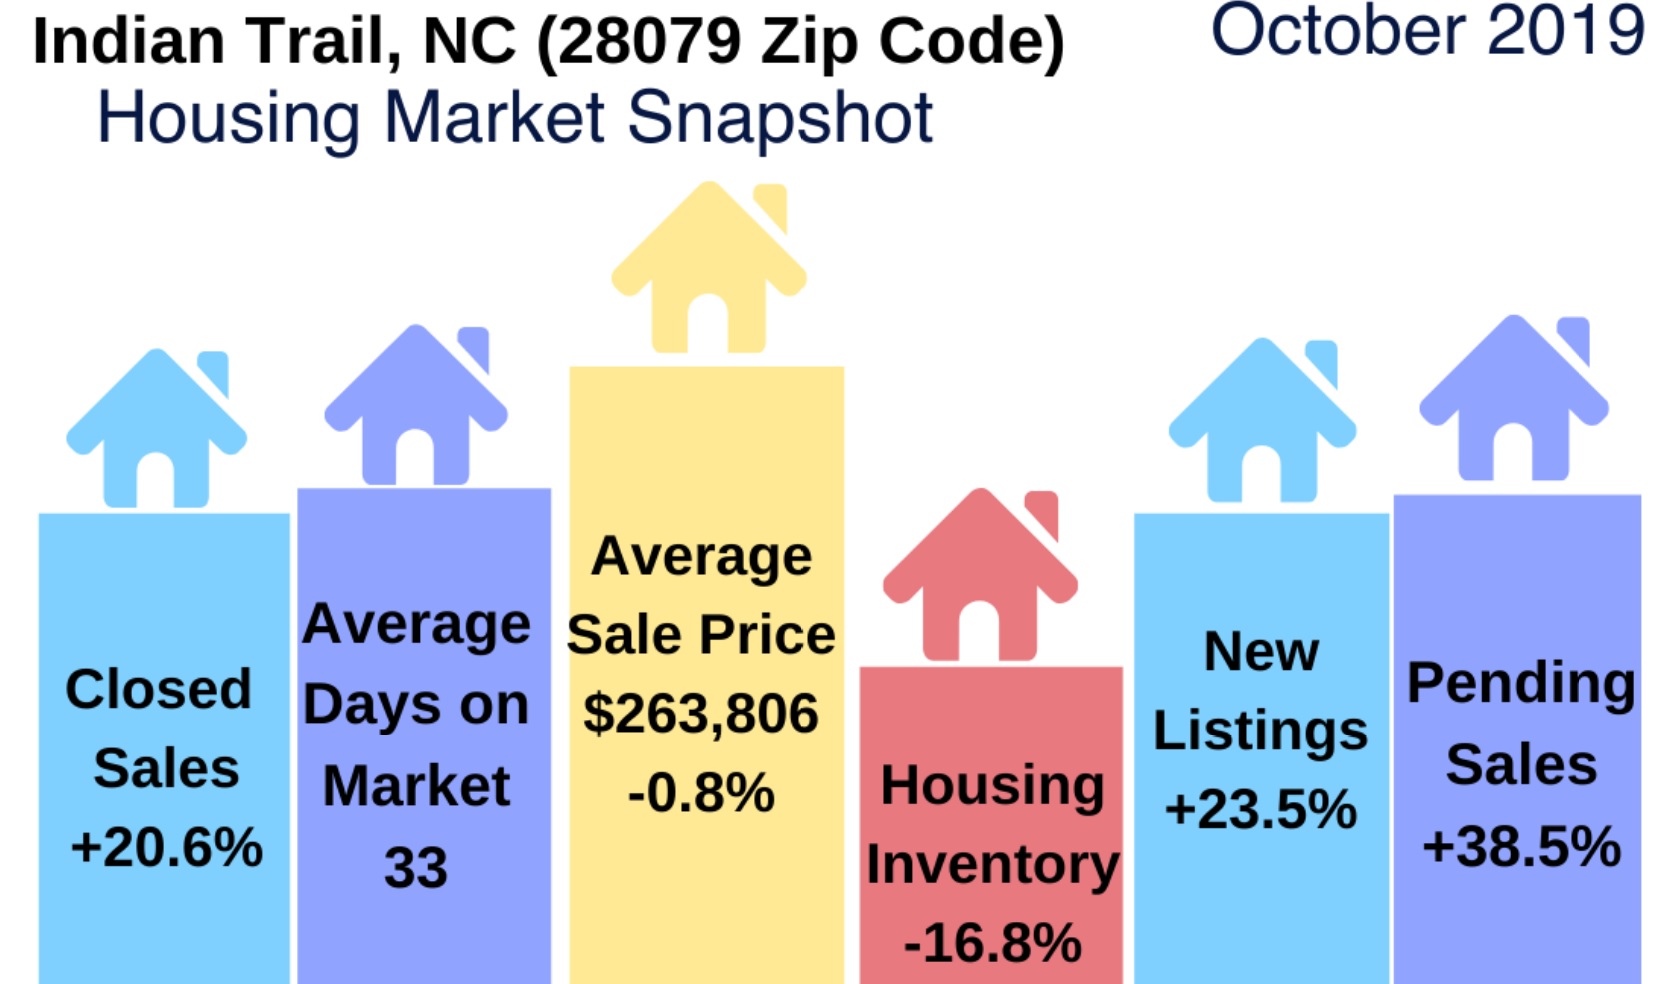 Indian Trail Real Estate Report: October 2019